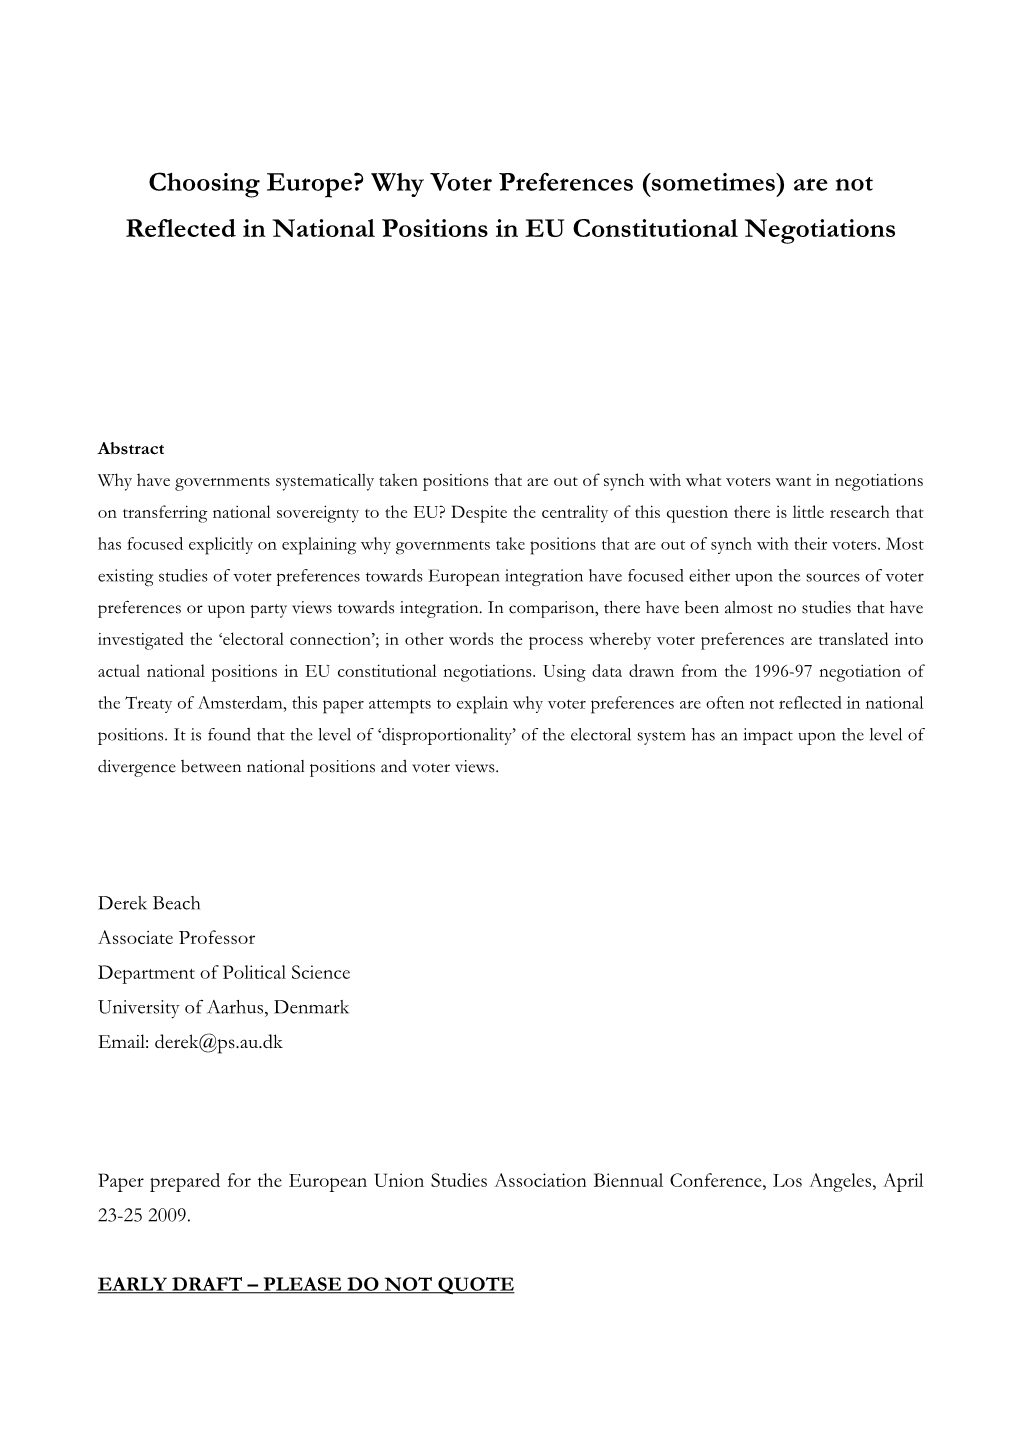 Why Voter Preferences (Sometimes) Are Not Reflected in National Positions in EU Constitutional Negotiations